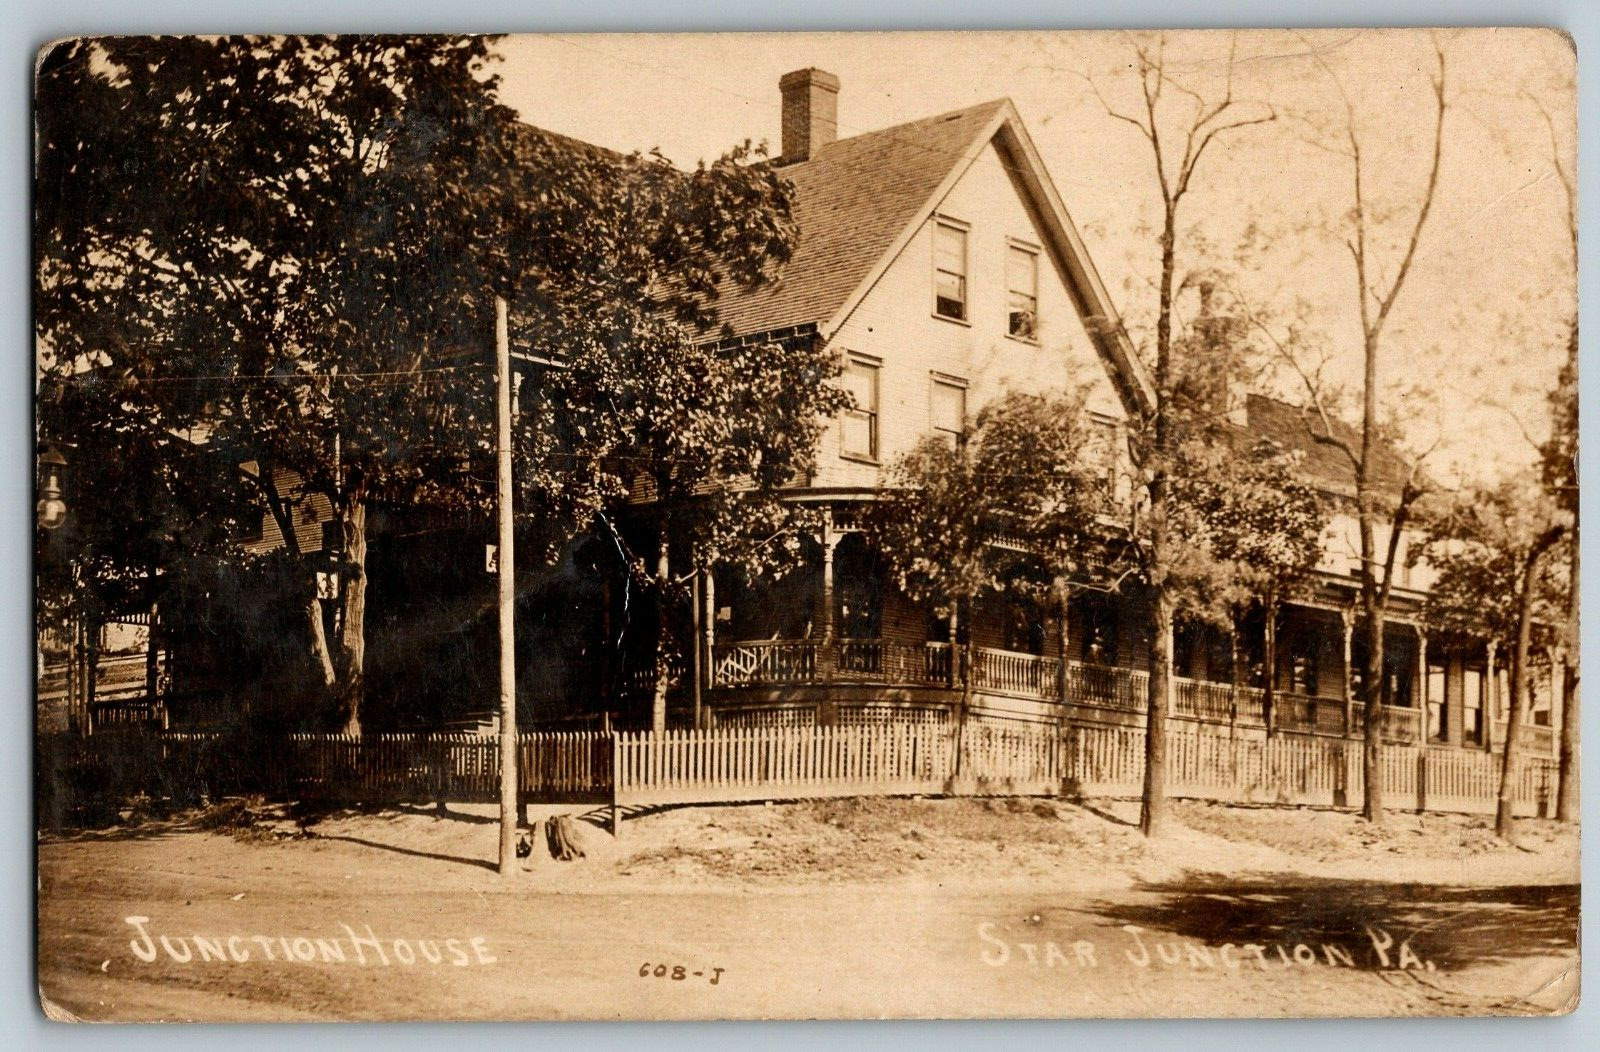 RPPC Vintage Postcard - Star Junction Pennsylvania, Junction House - Posted